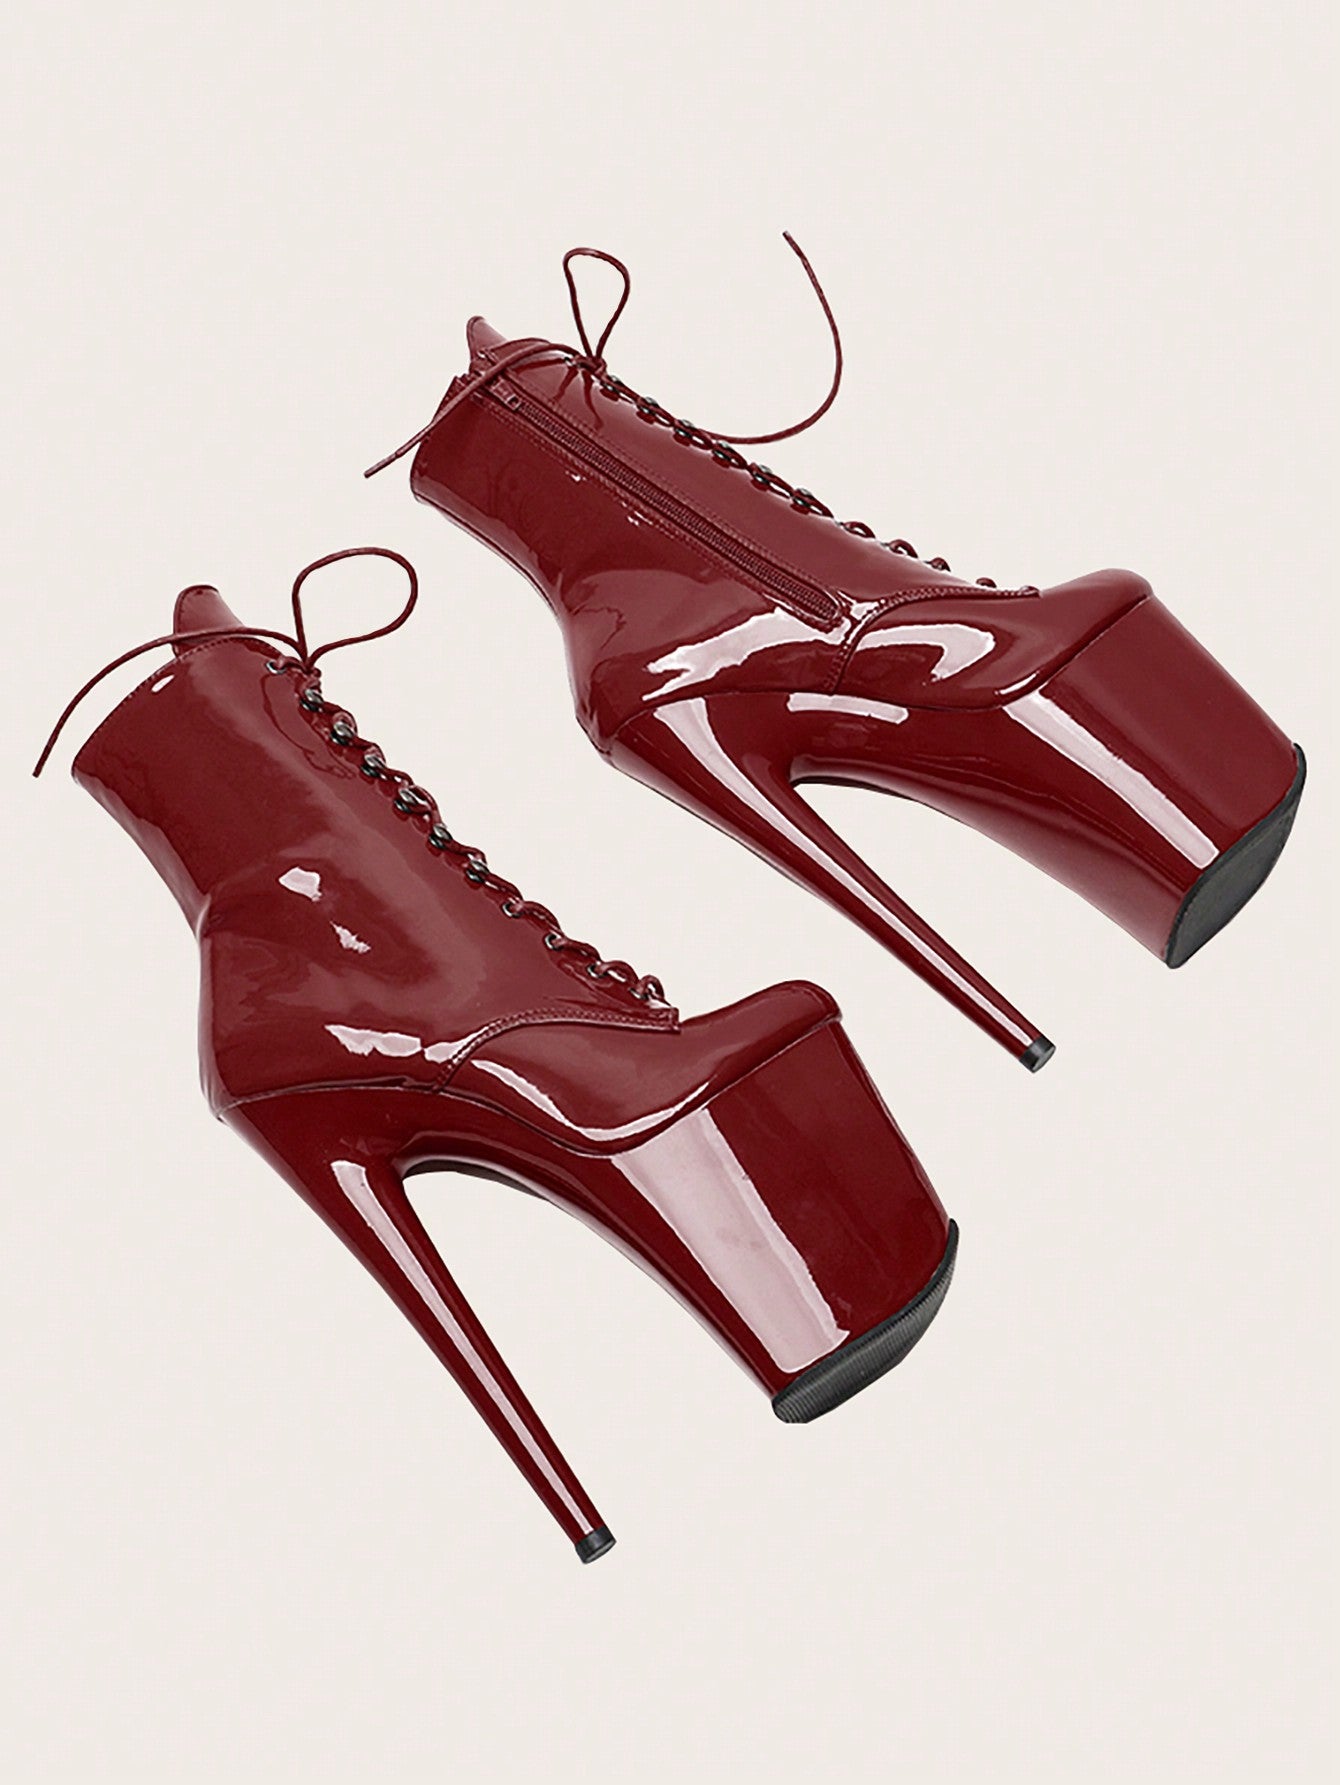 1 Pair Of 8-inch High-heeled Mirror Pu Leather Ankle Boots With Waterproof Platform, Band Decoration, Preventing Slippery, Suitable For Nightclubs, Steel Dance Performances, Modeling Shows And Other Occasions-Burgundy-2